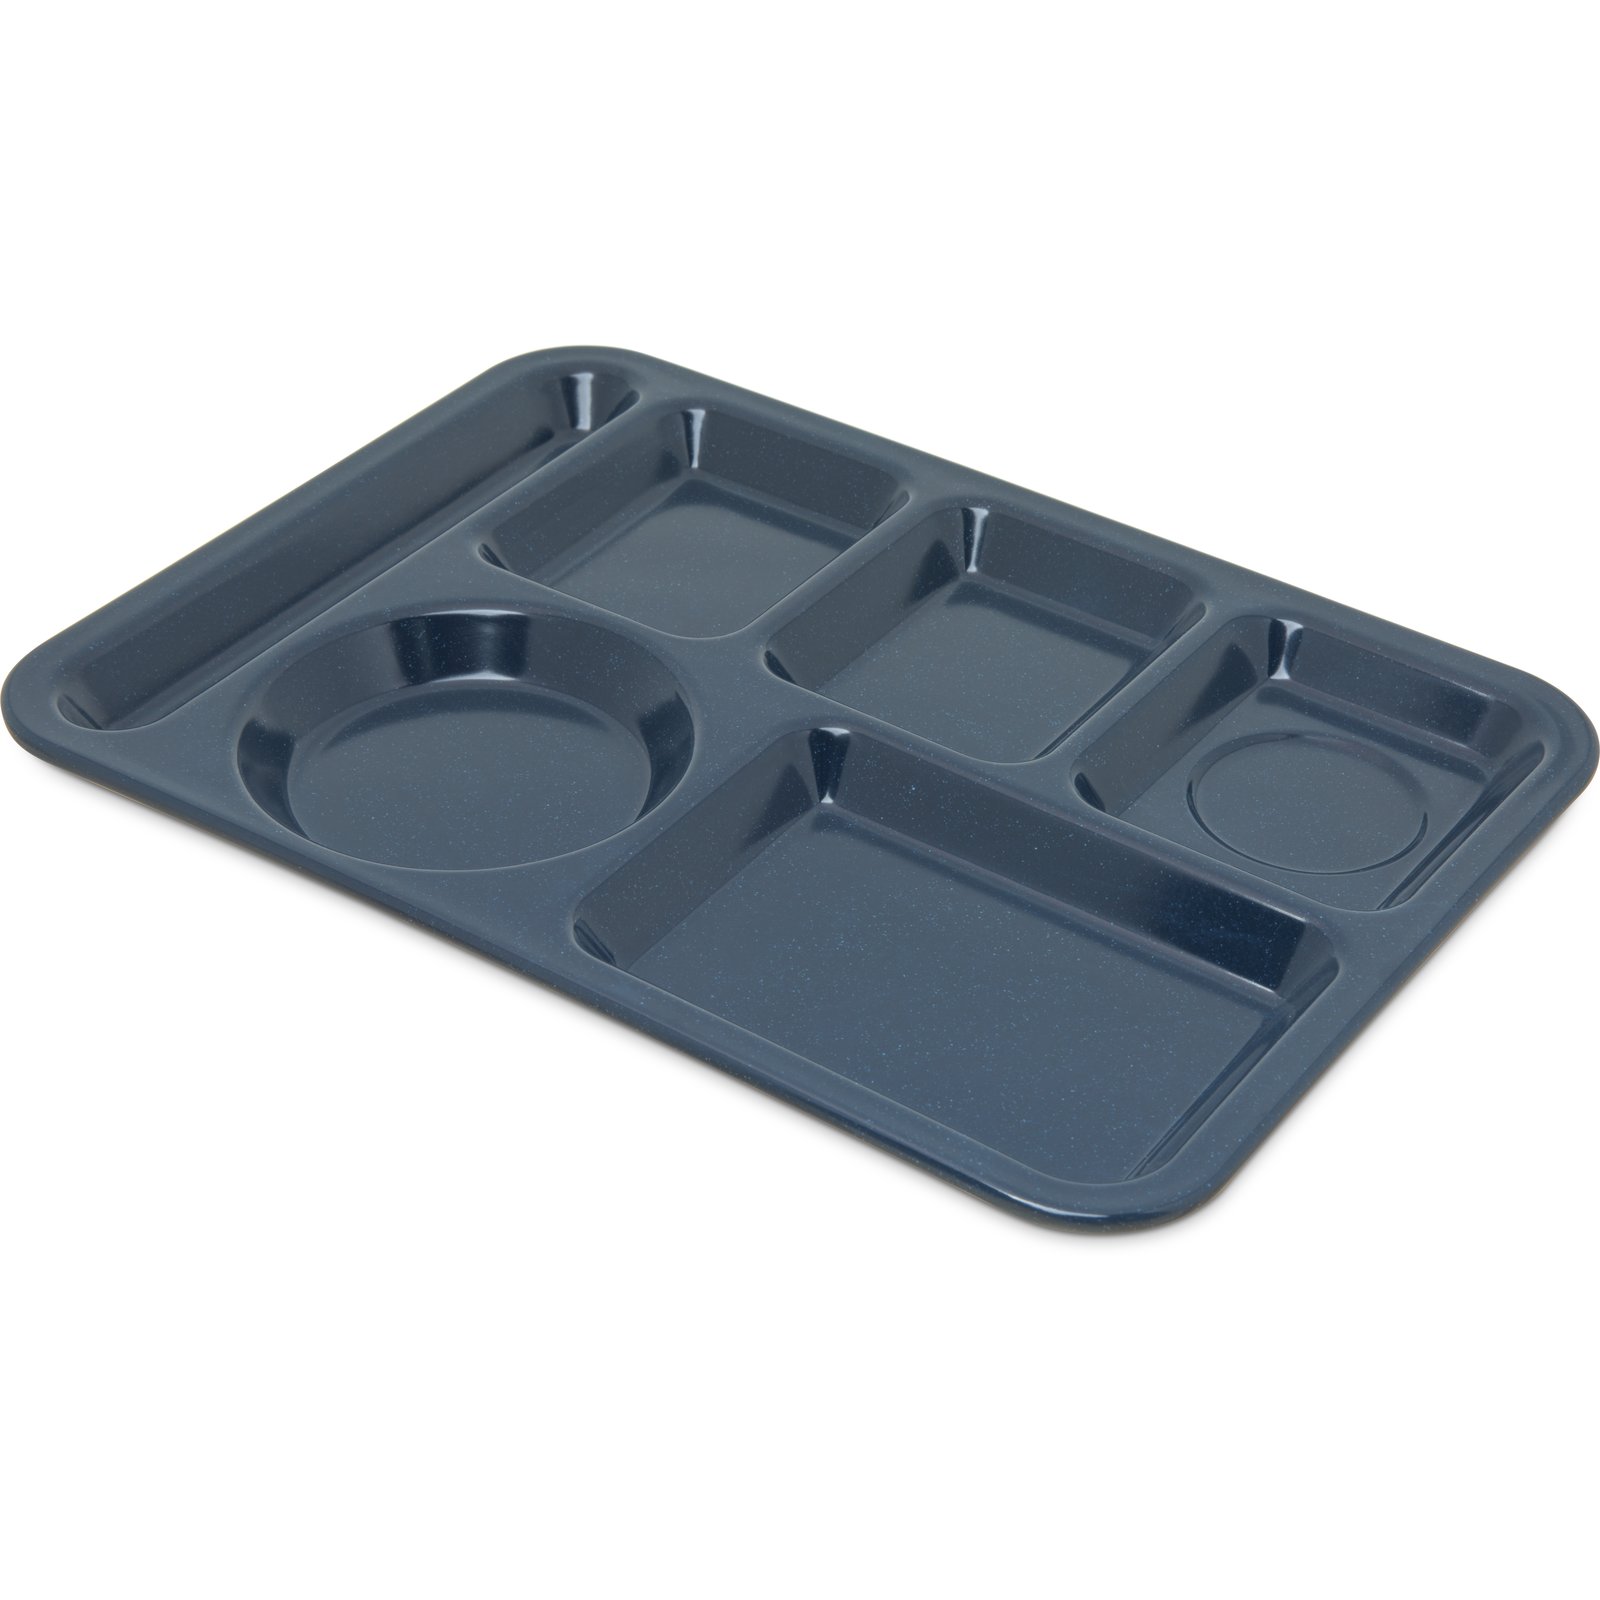 6 Compartment Trays, Case of 250 – CiboWares